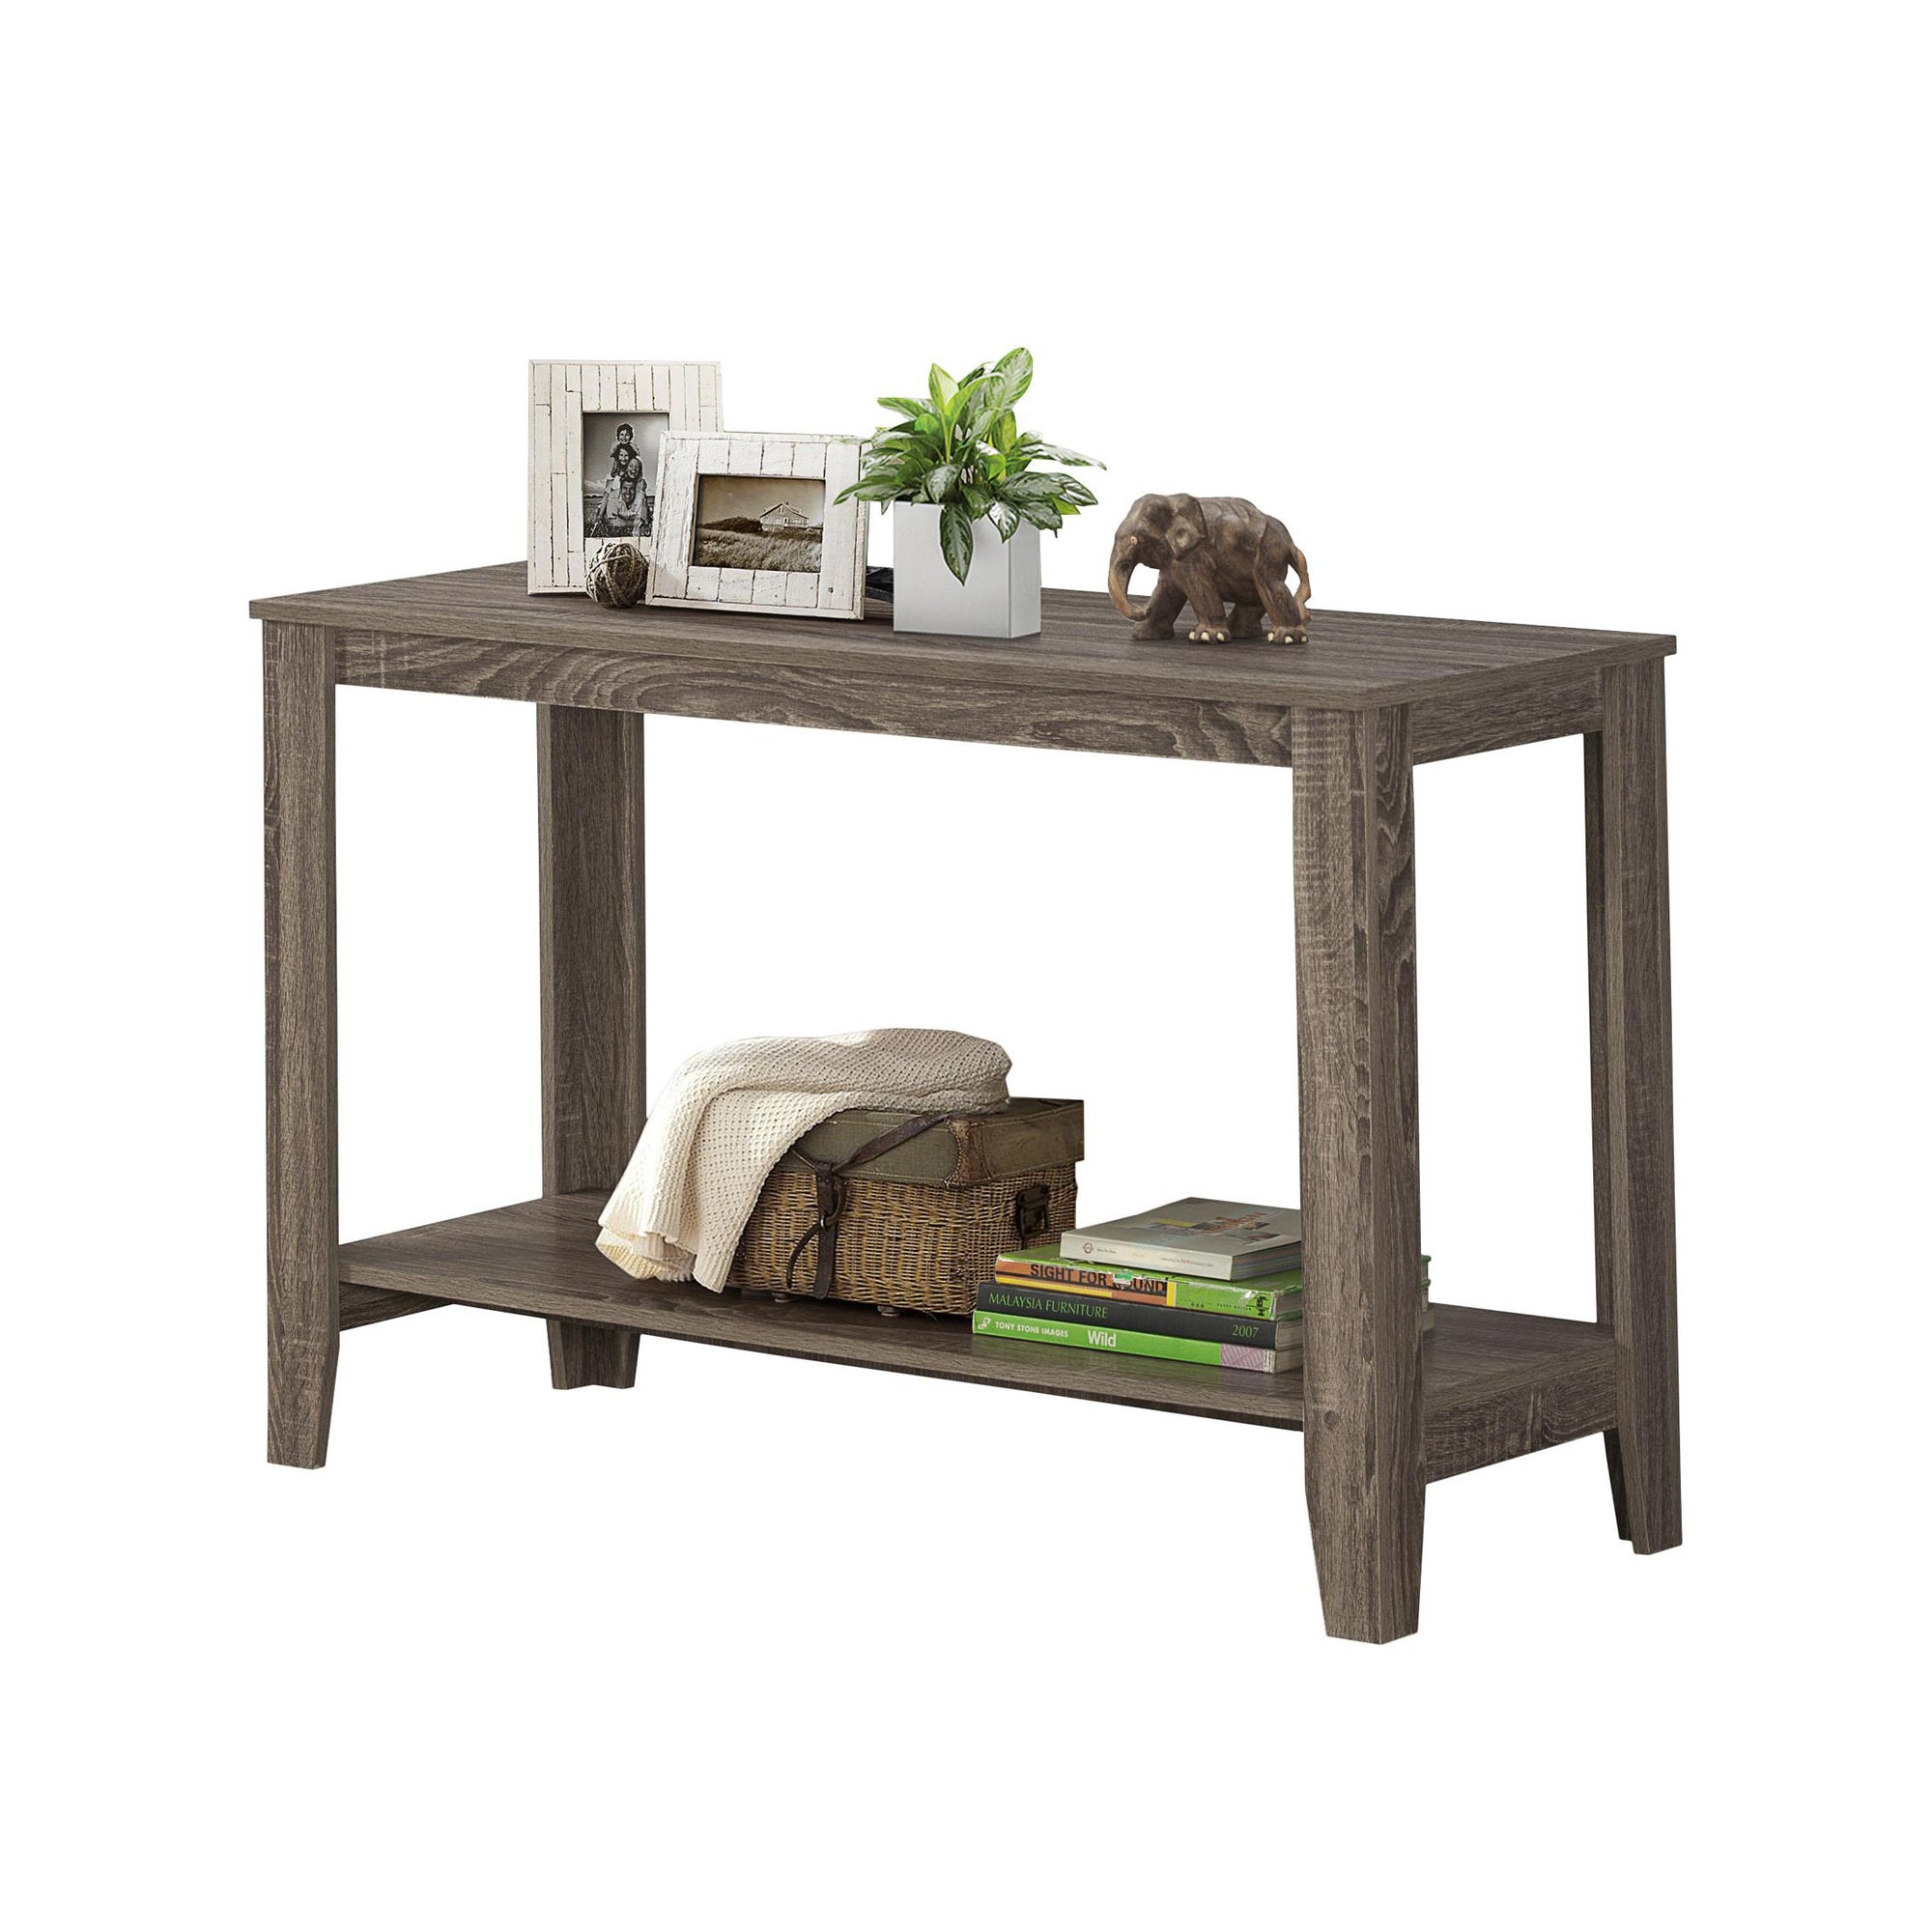 MN-637915S    Accent Table, Console, Entryway, Narrow, Sofa, Living Room, Bedroom, Laminate, Dark Taupe, Contemporary, Modern